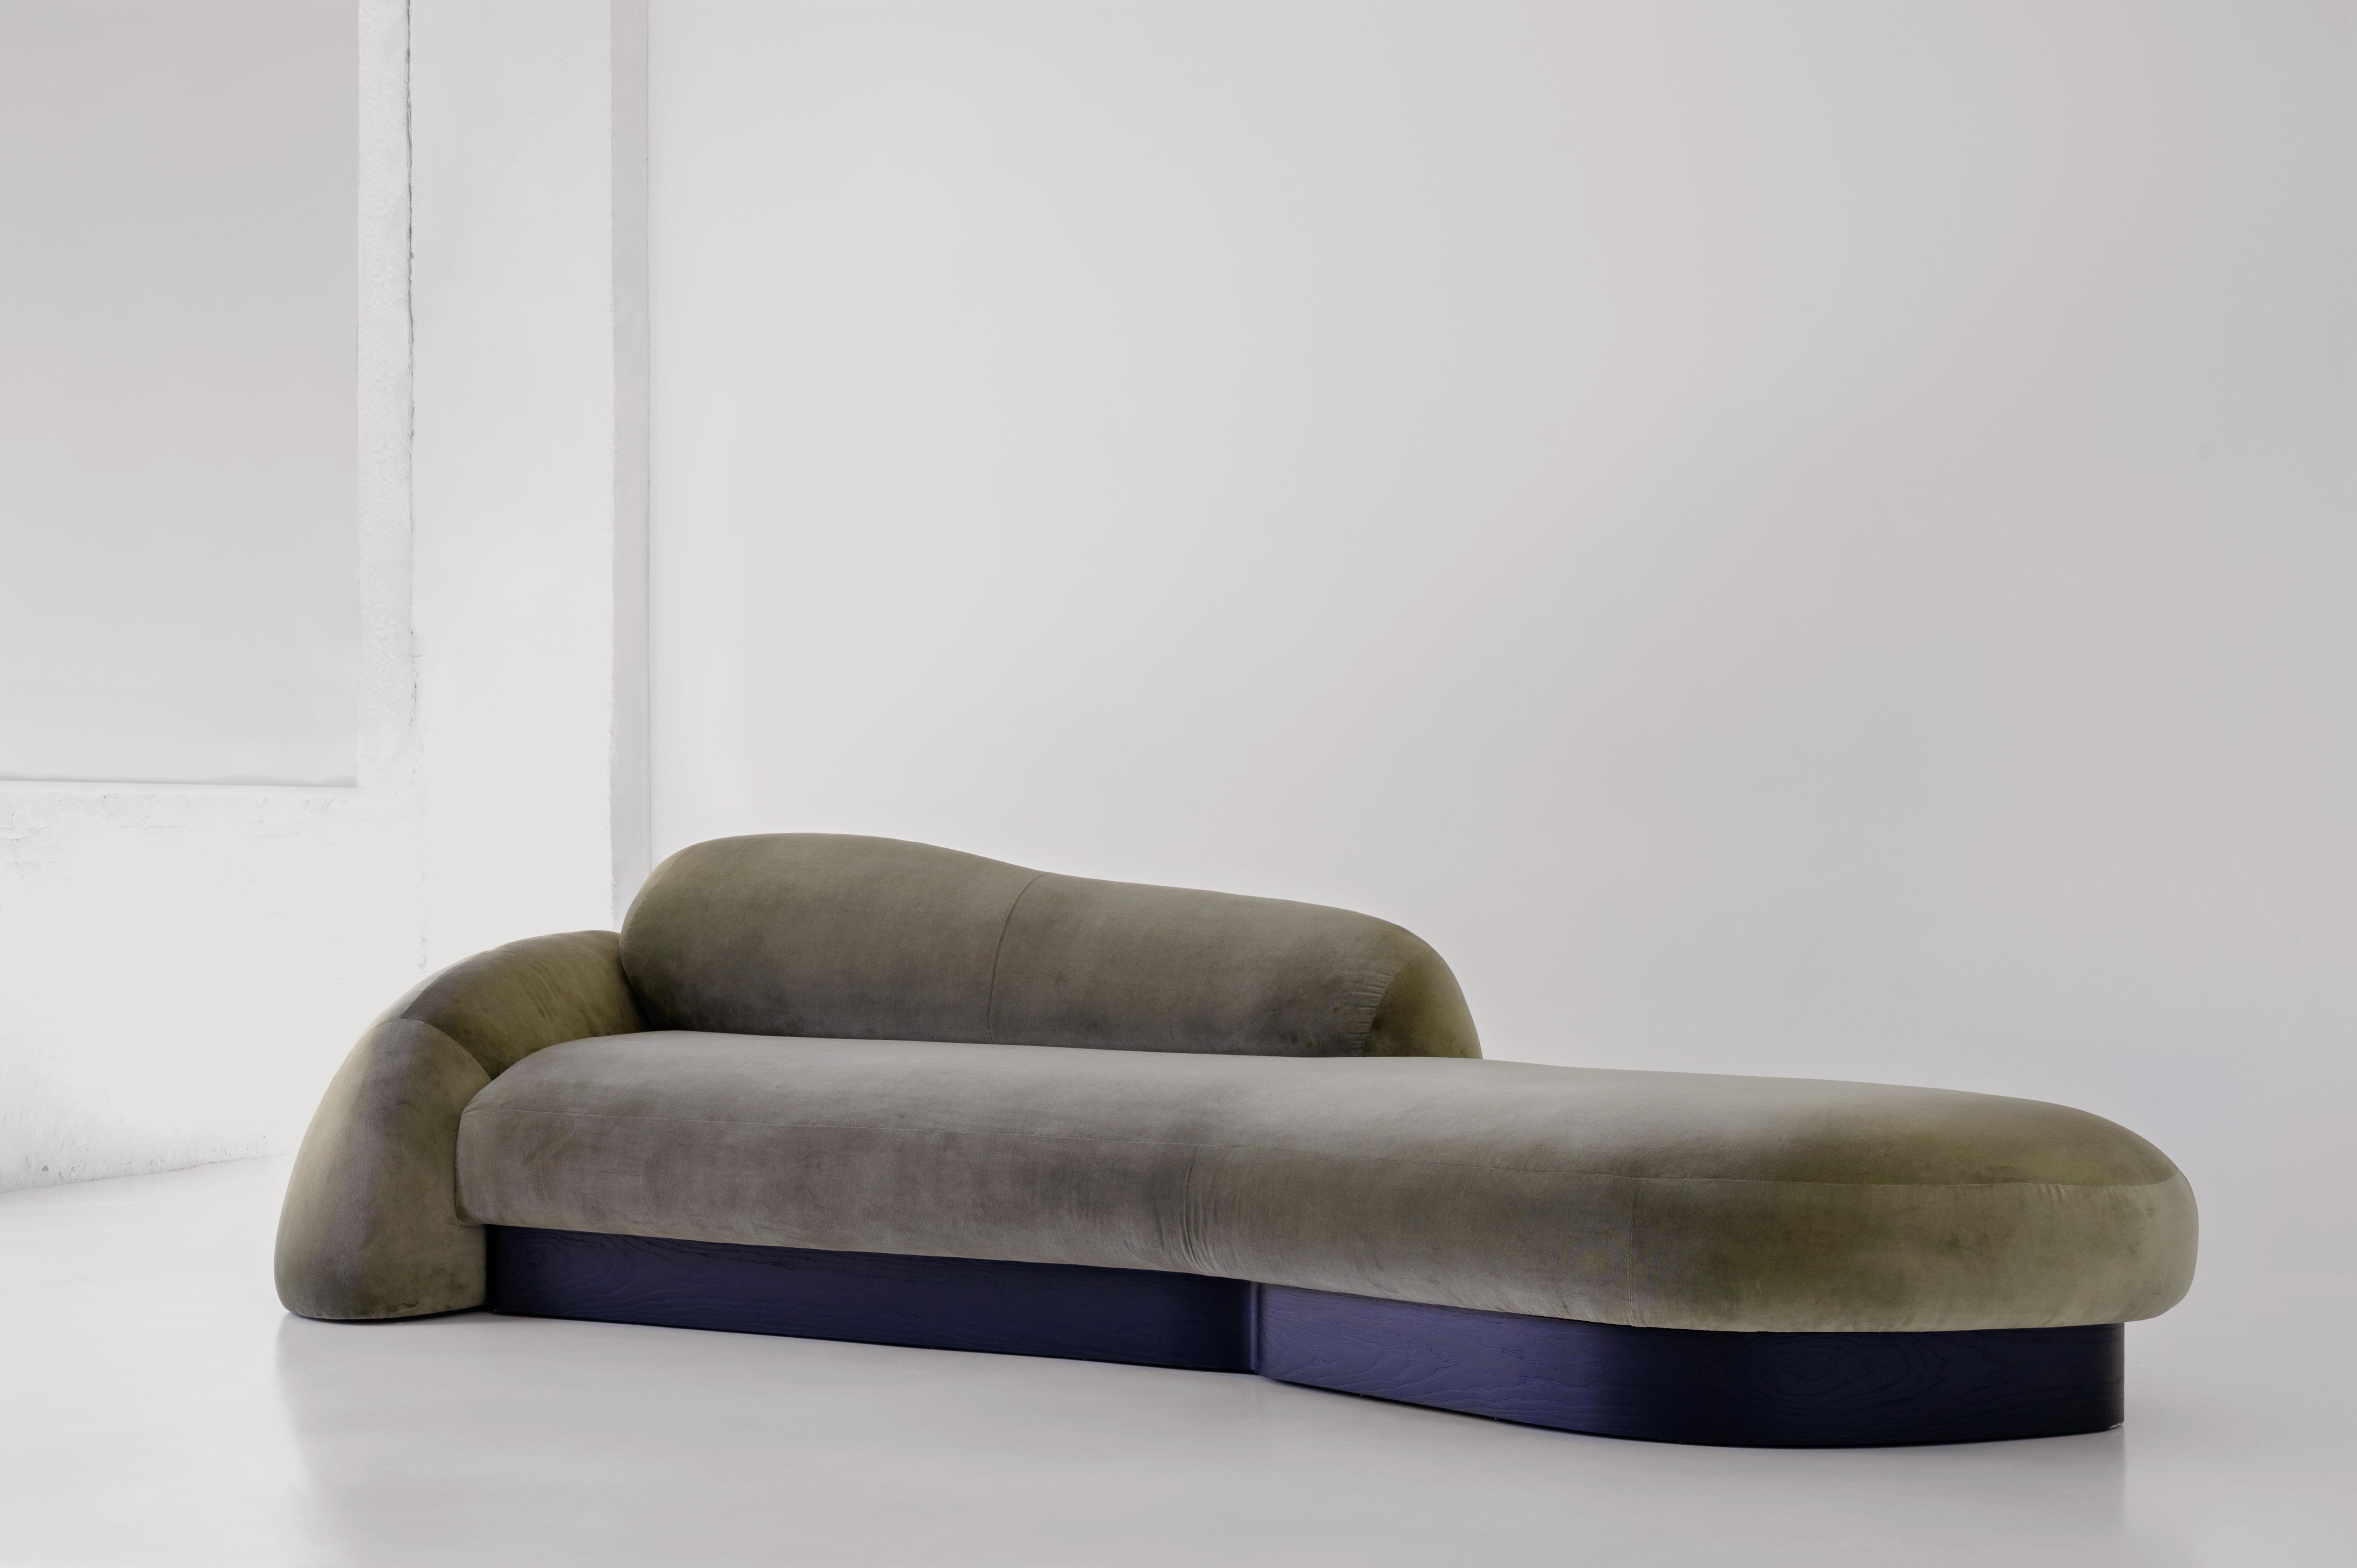 Plyn sofa by Faina
Design: Victoriya Yakusha
Materials: : textile, foam rubber, sintepon, wood
Dimensions: 330 x 150 x 80 cm
The dimensions can be customized

Following the concept of the fluidity of being,
PLYN sofa features vast stone-like blocks